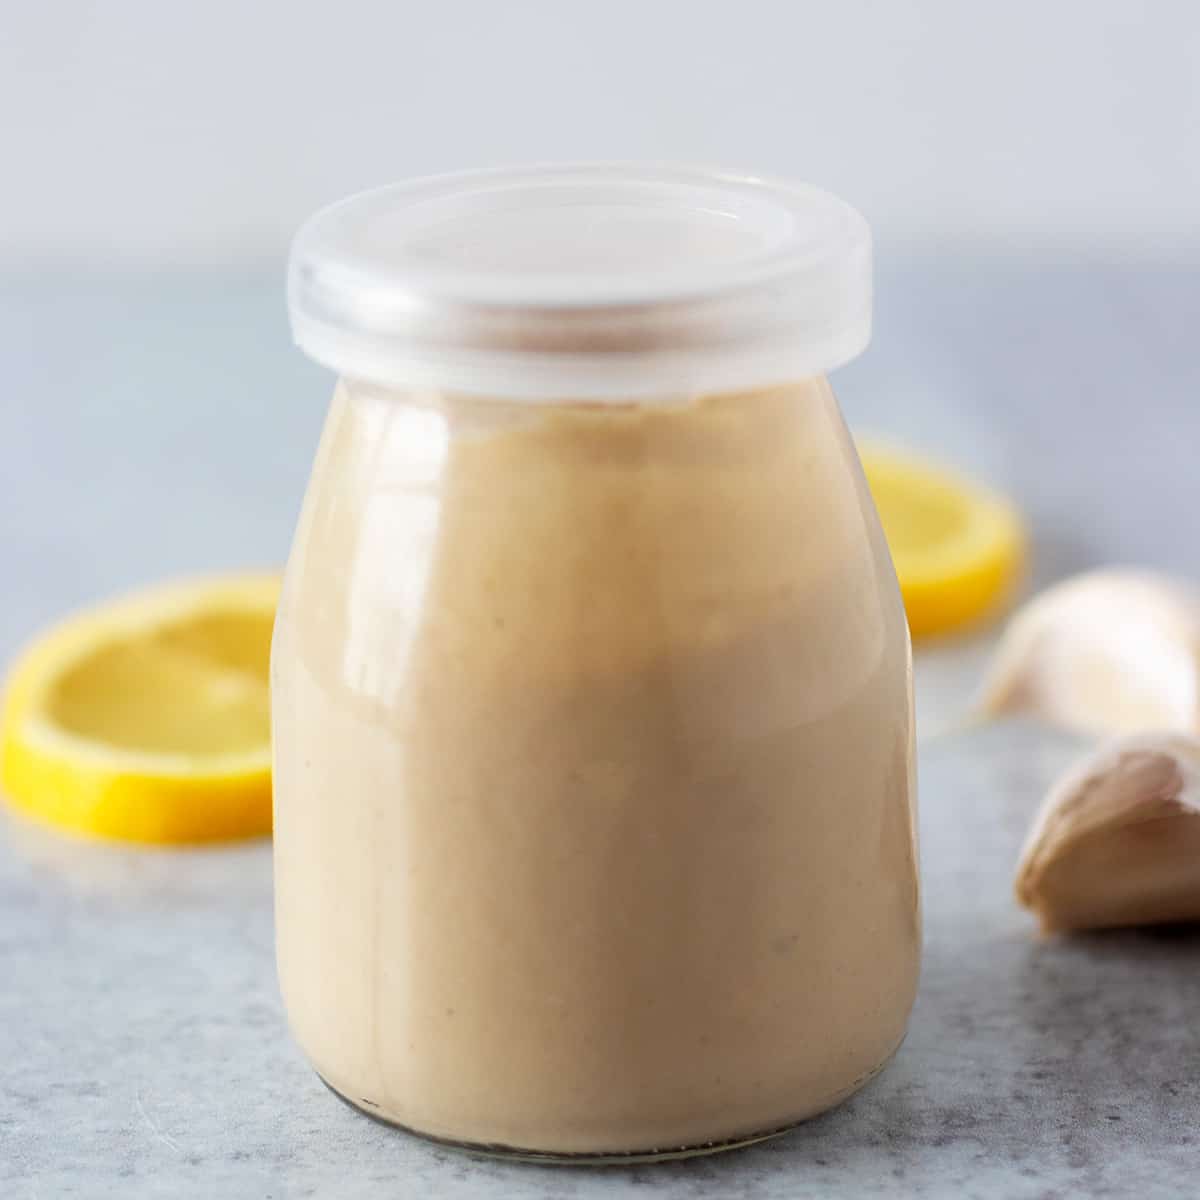 tahini dressing in a glass gar with lemon slices and garlic cloves in the background.